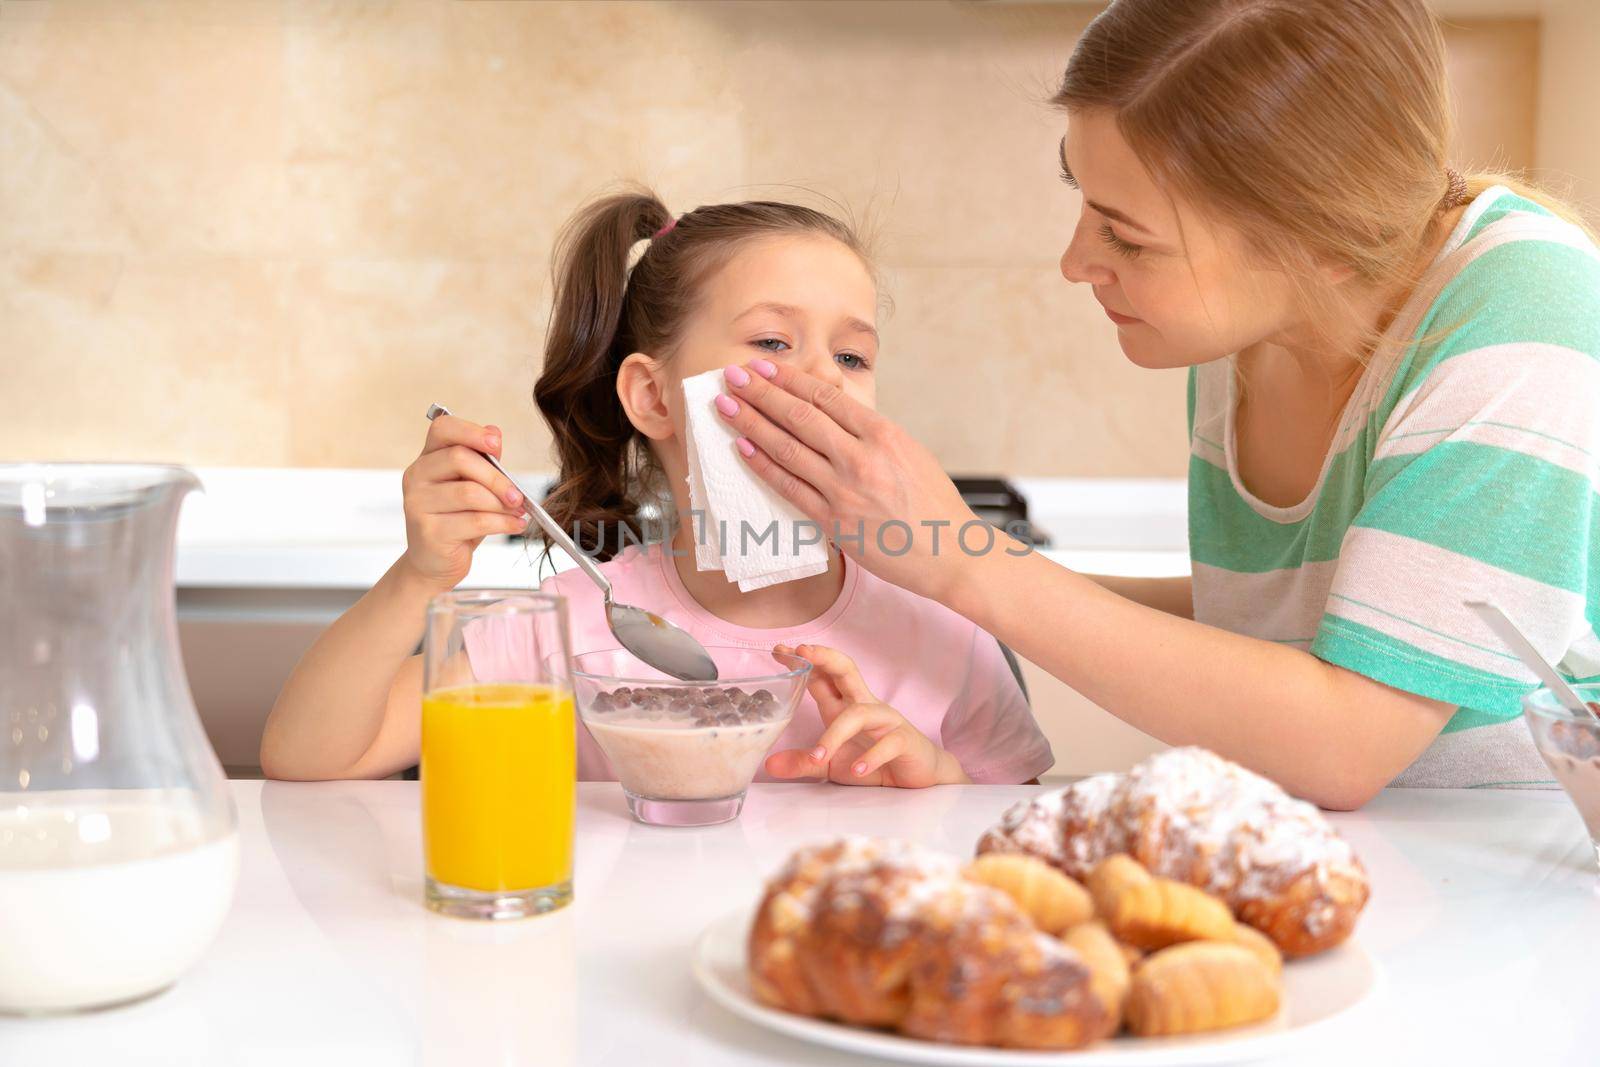 Mother serving breakfast to her two daughters at a table in kitchen